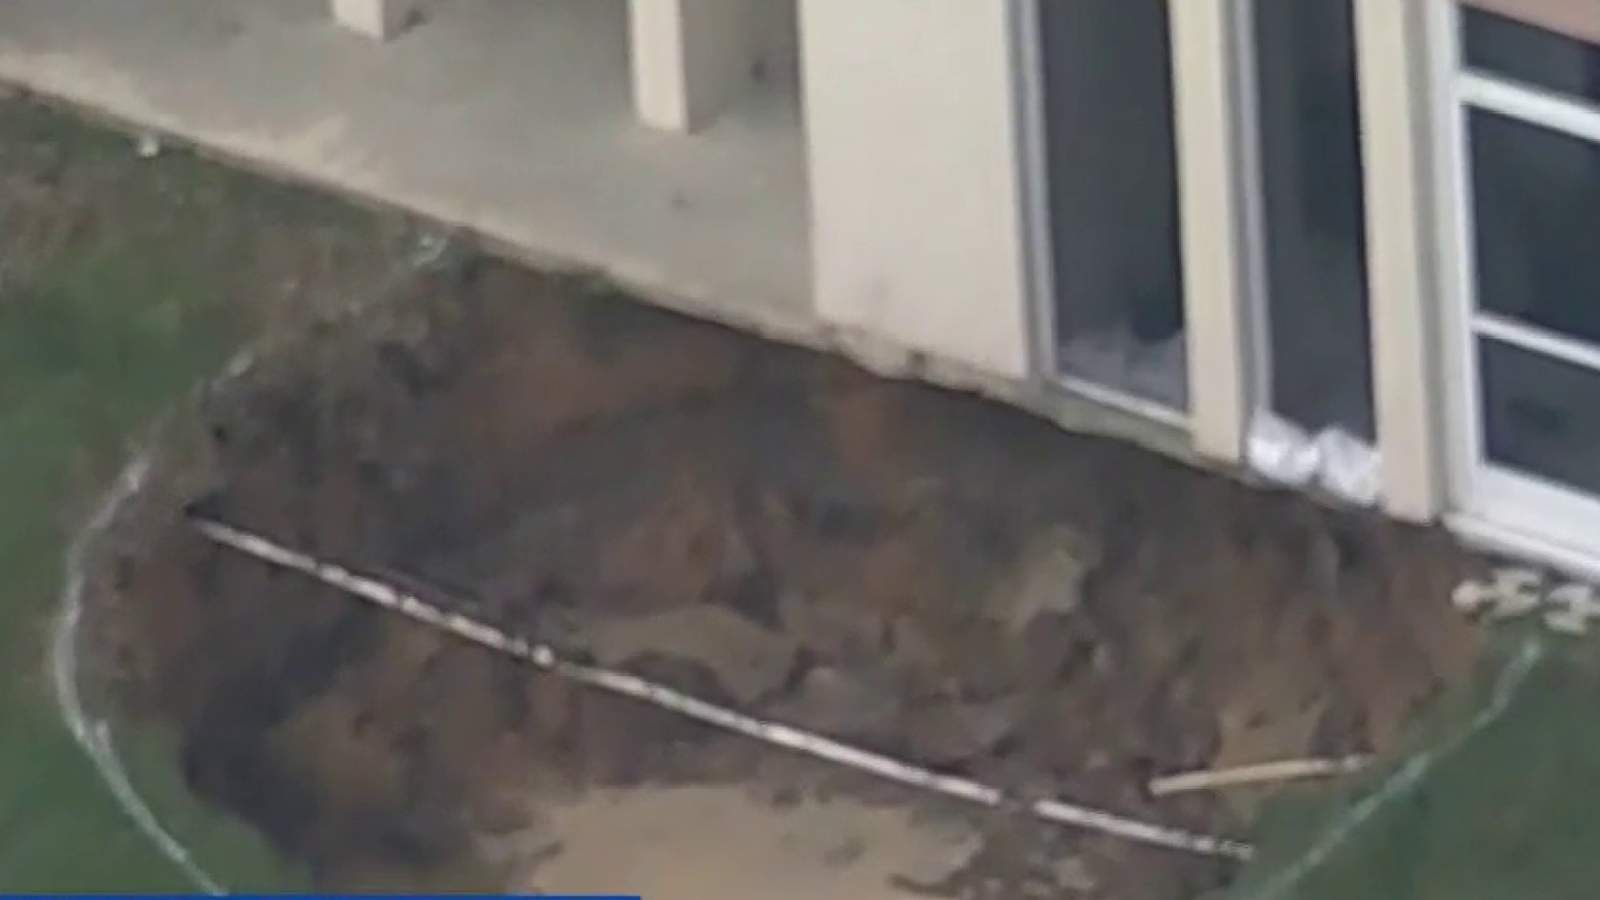 Residents return home after sinkhole opens outside Altamonte Springs condo complex